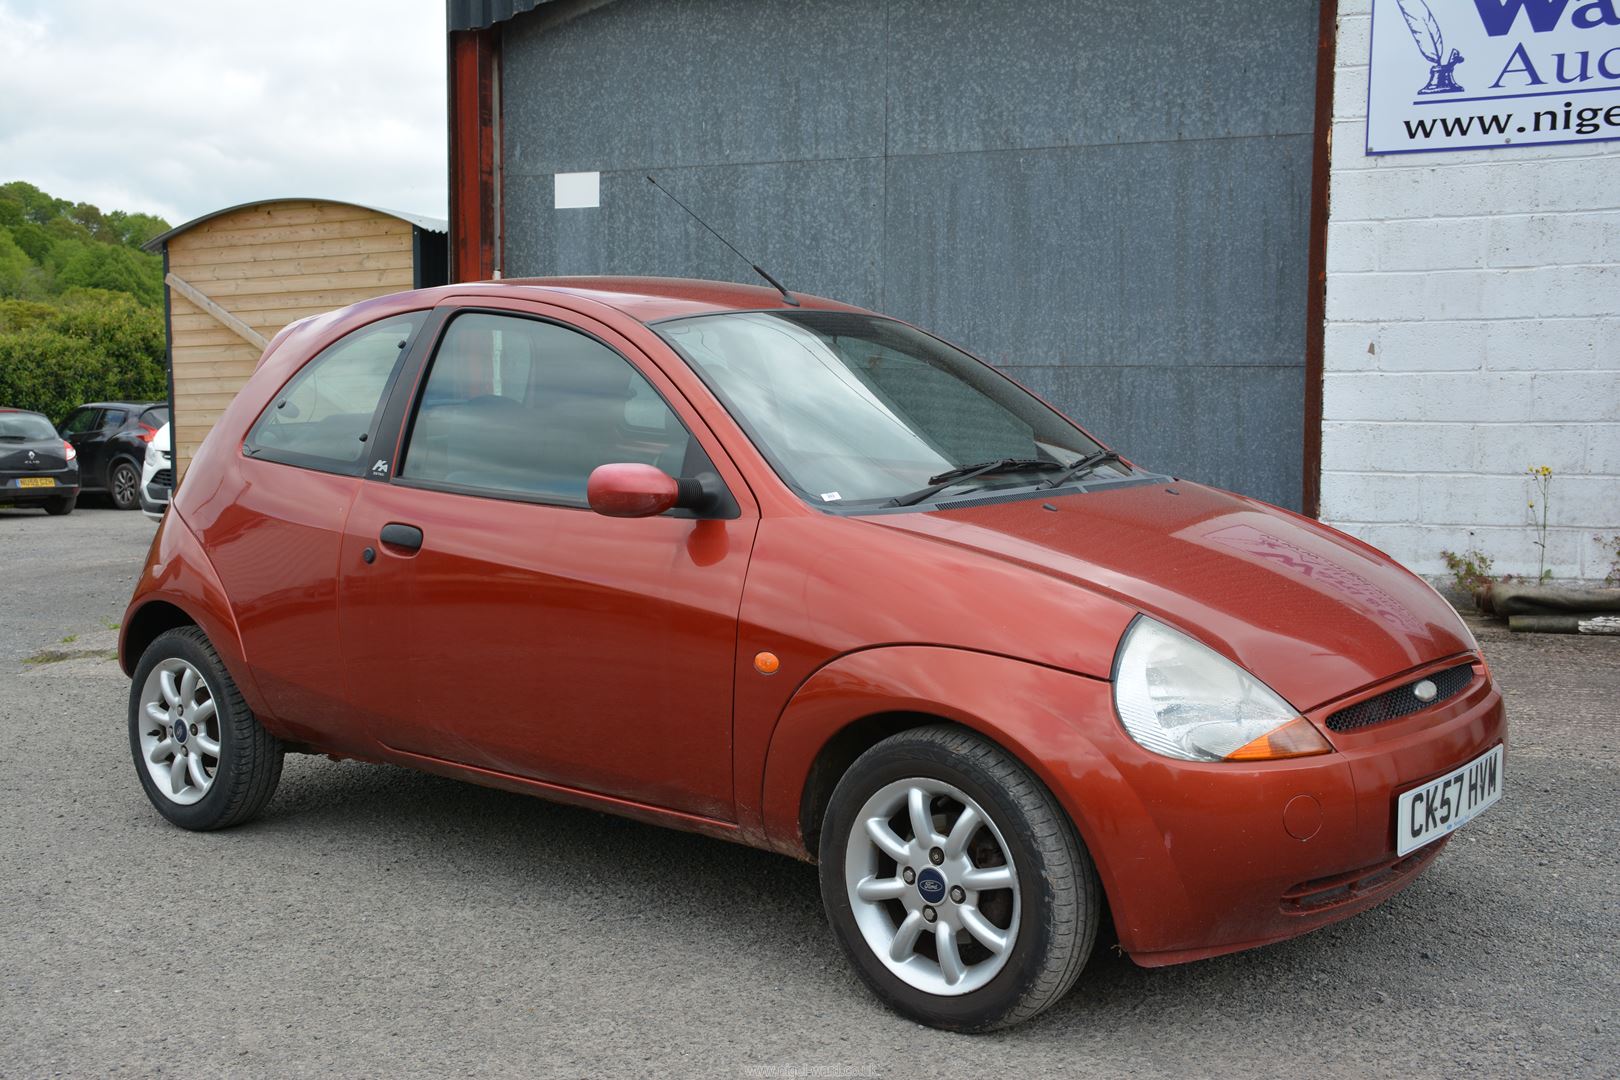 A Ford KA Zetec Climate 1299cc petrol-engined three door hatchback motor Car finished in red,